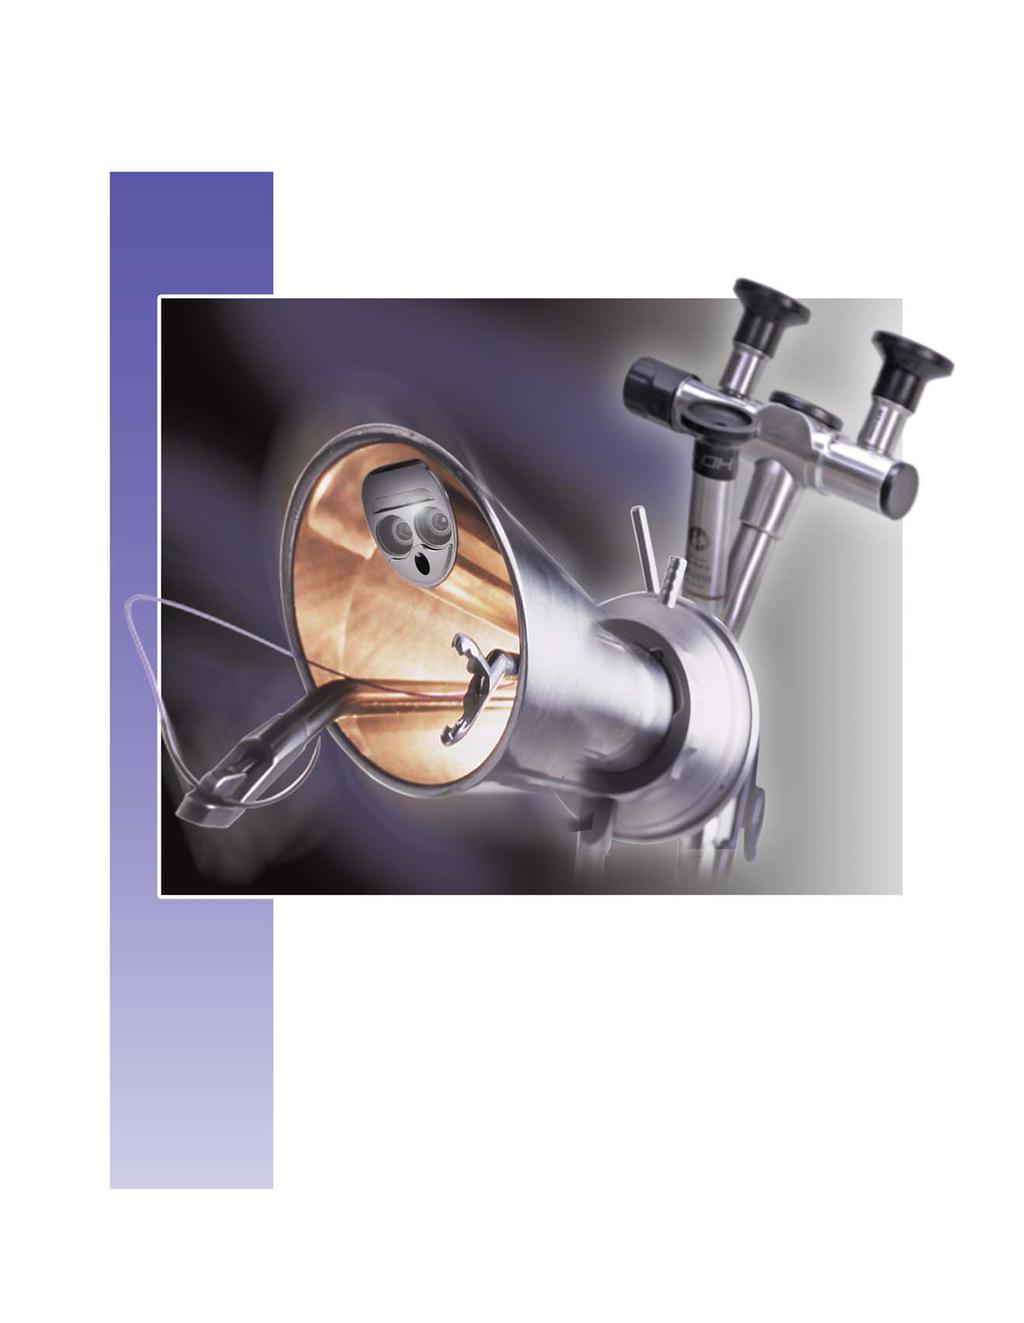 TEM Minimally Invasive TEM Instrument System for Transanal Endoscopic Microsurgery The only complete system for transanal endoscopic microsurgery Unique autoclavable